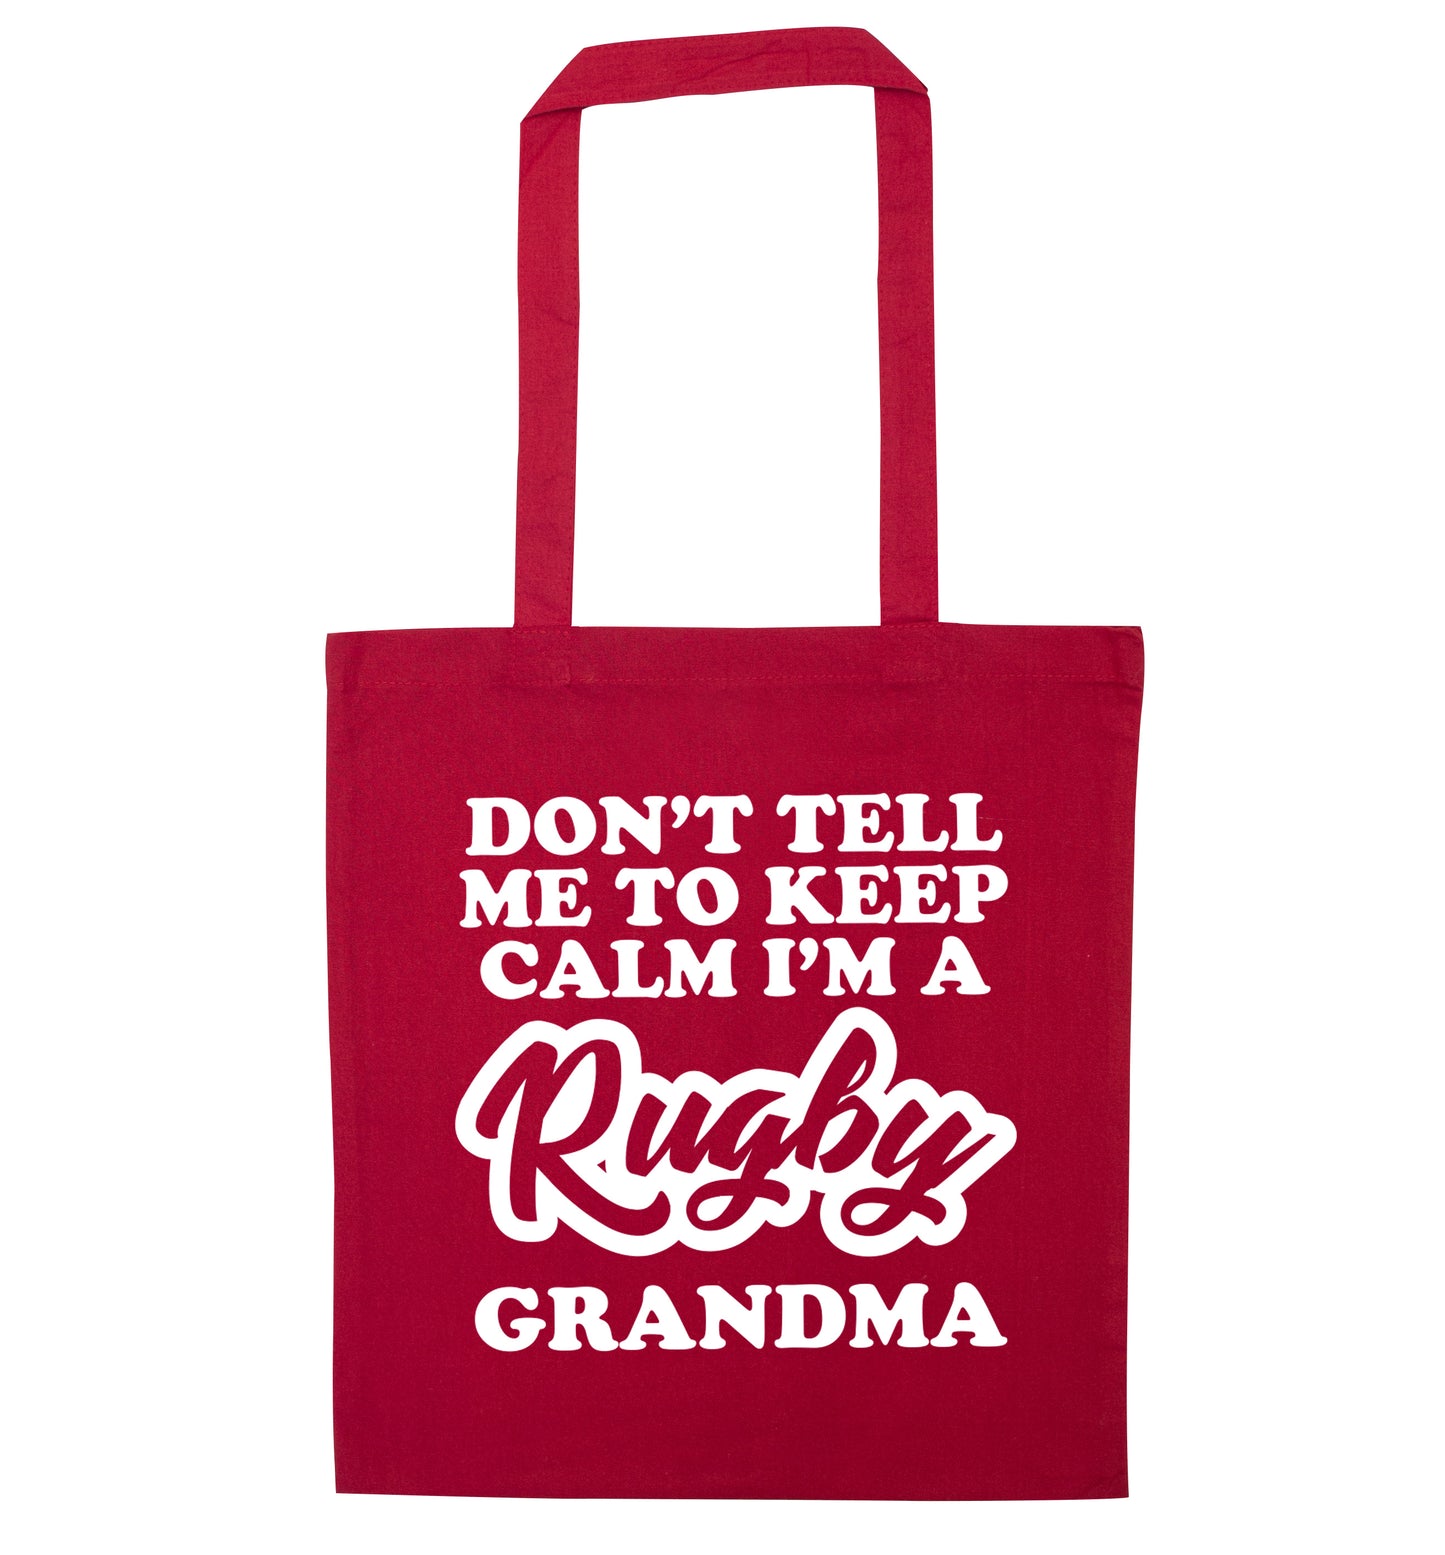 Don't tell me to keep calm I'm a rugby grandma red tote bag